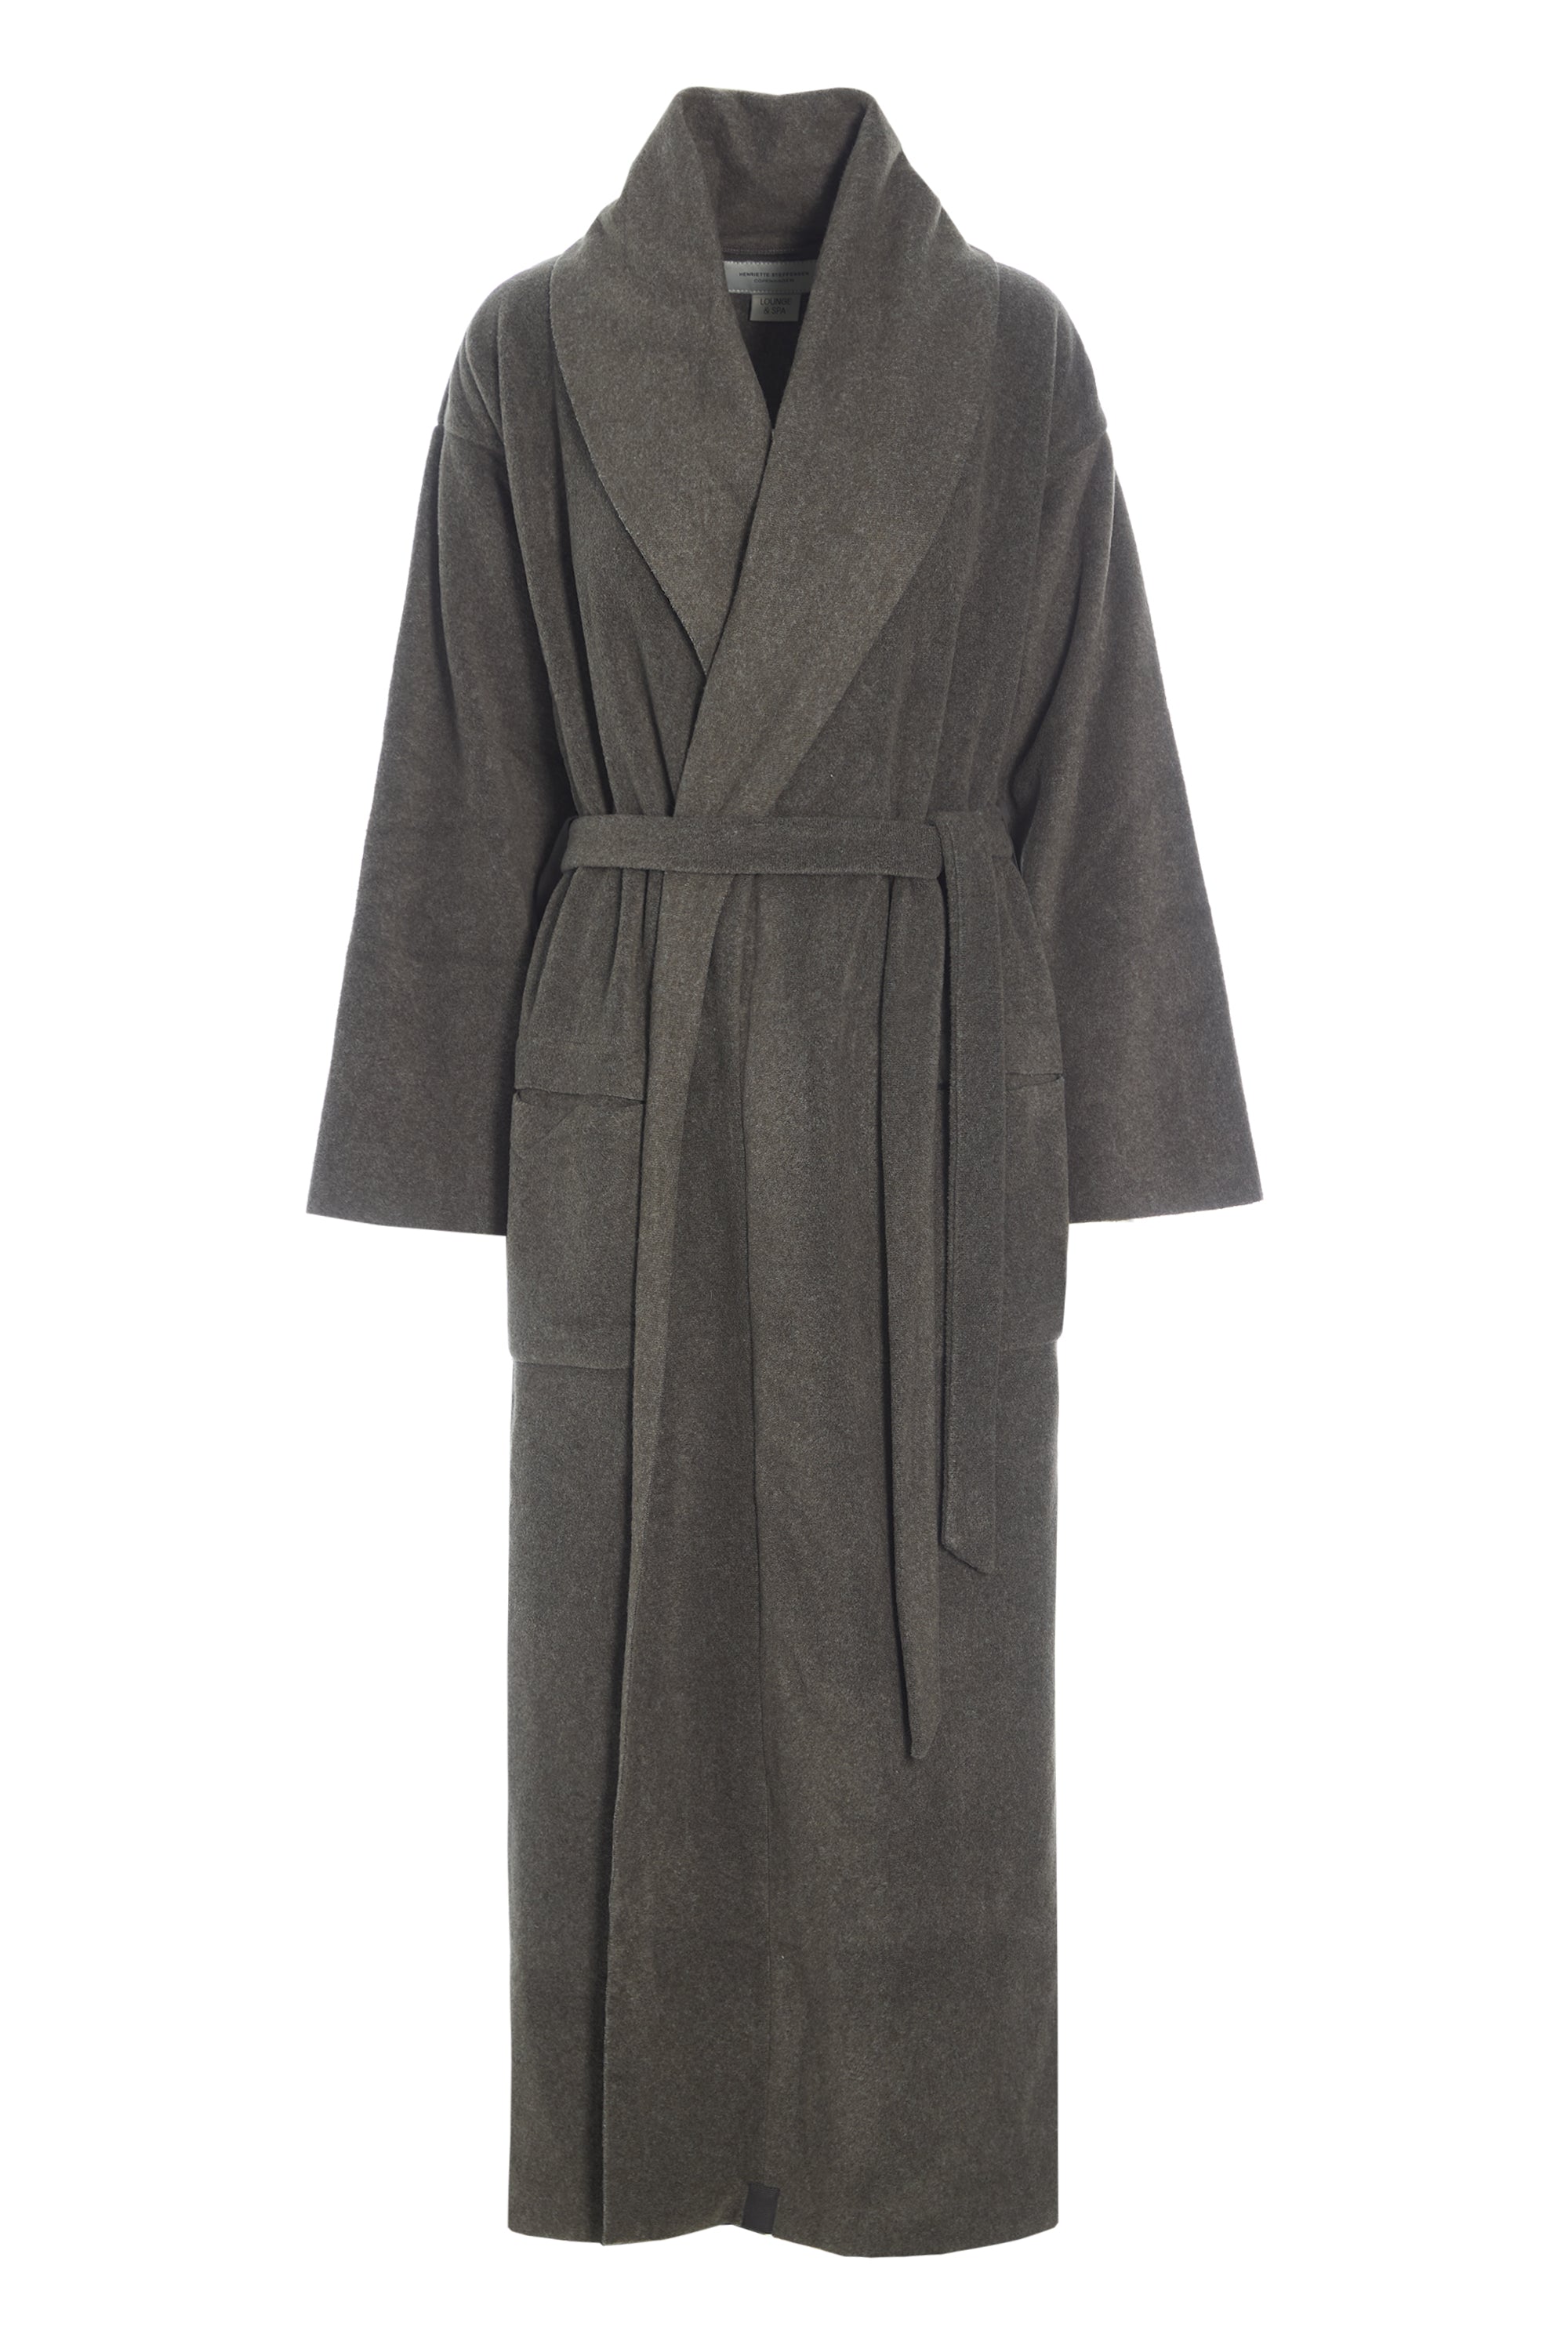 Womens Dressing Gowns and Robes | House of Fraser